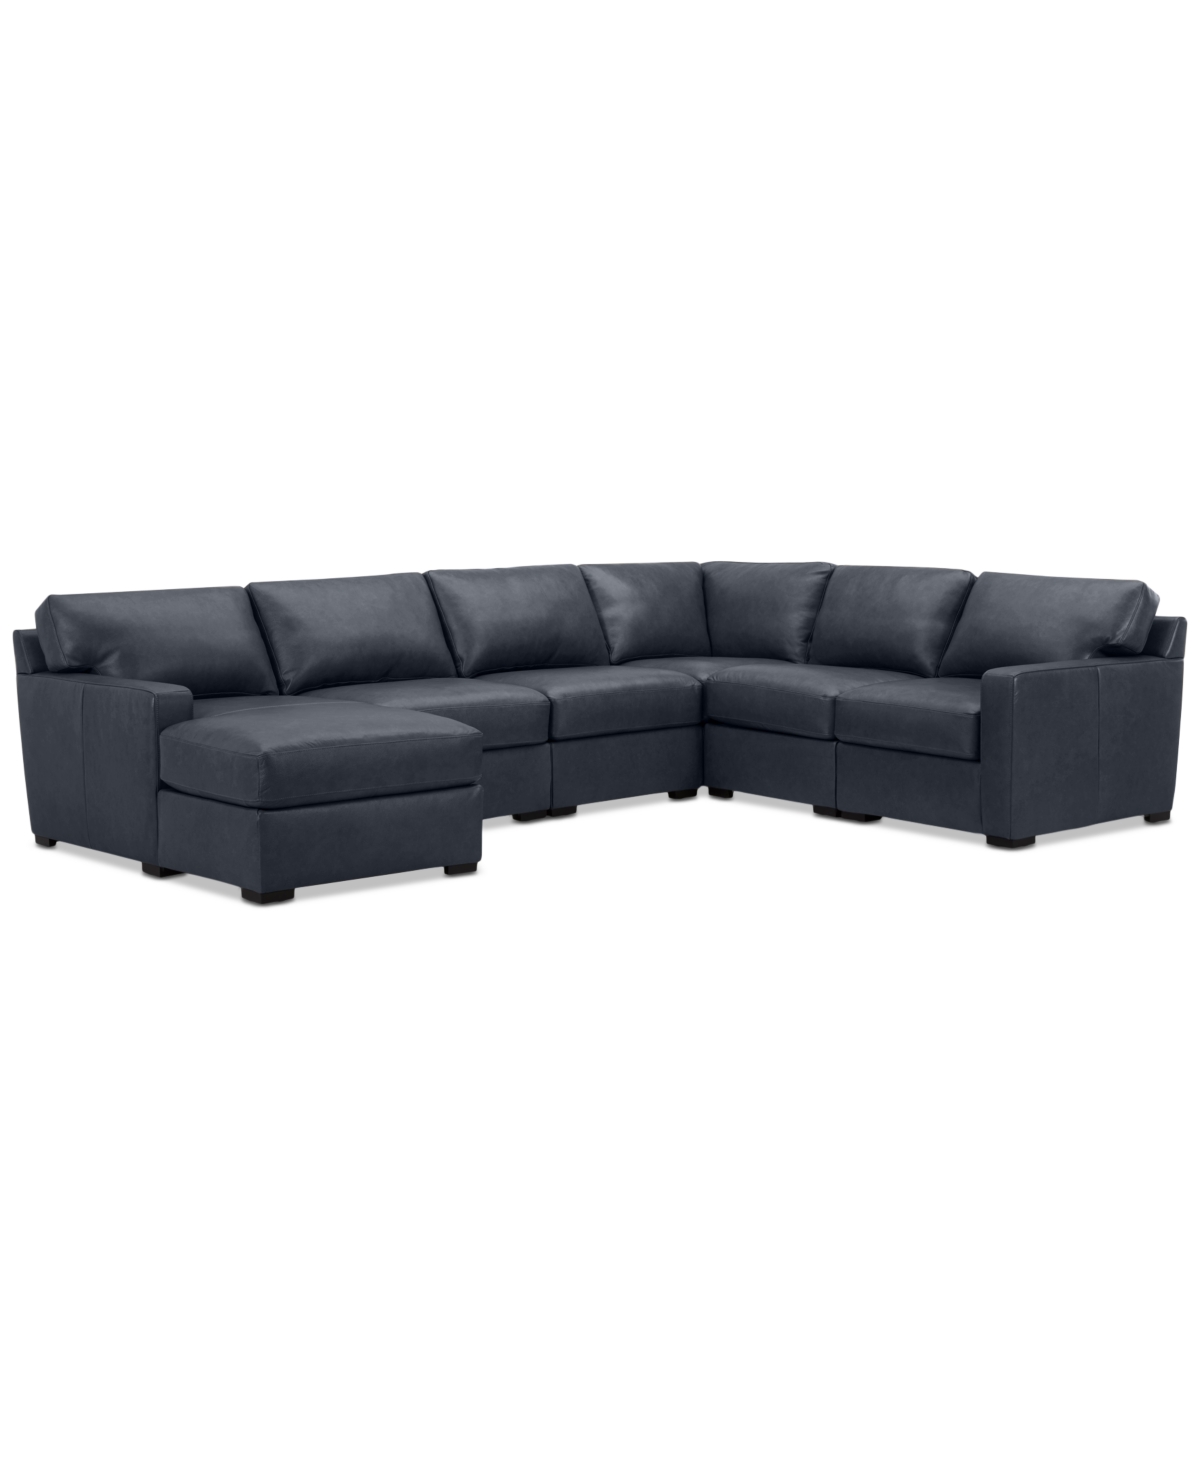 Macy's Radley 129" 6-pc. Leather Square Corner Modular Chaise Sectional, Created For  In Navy